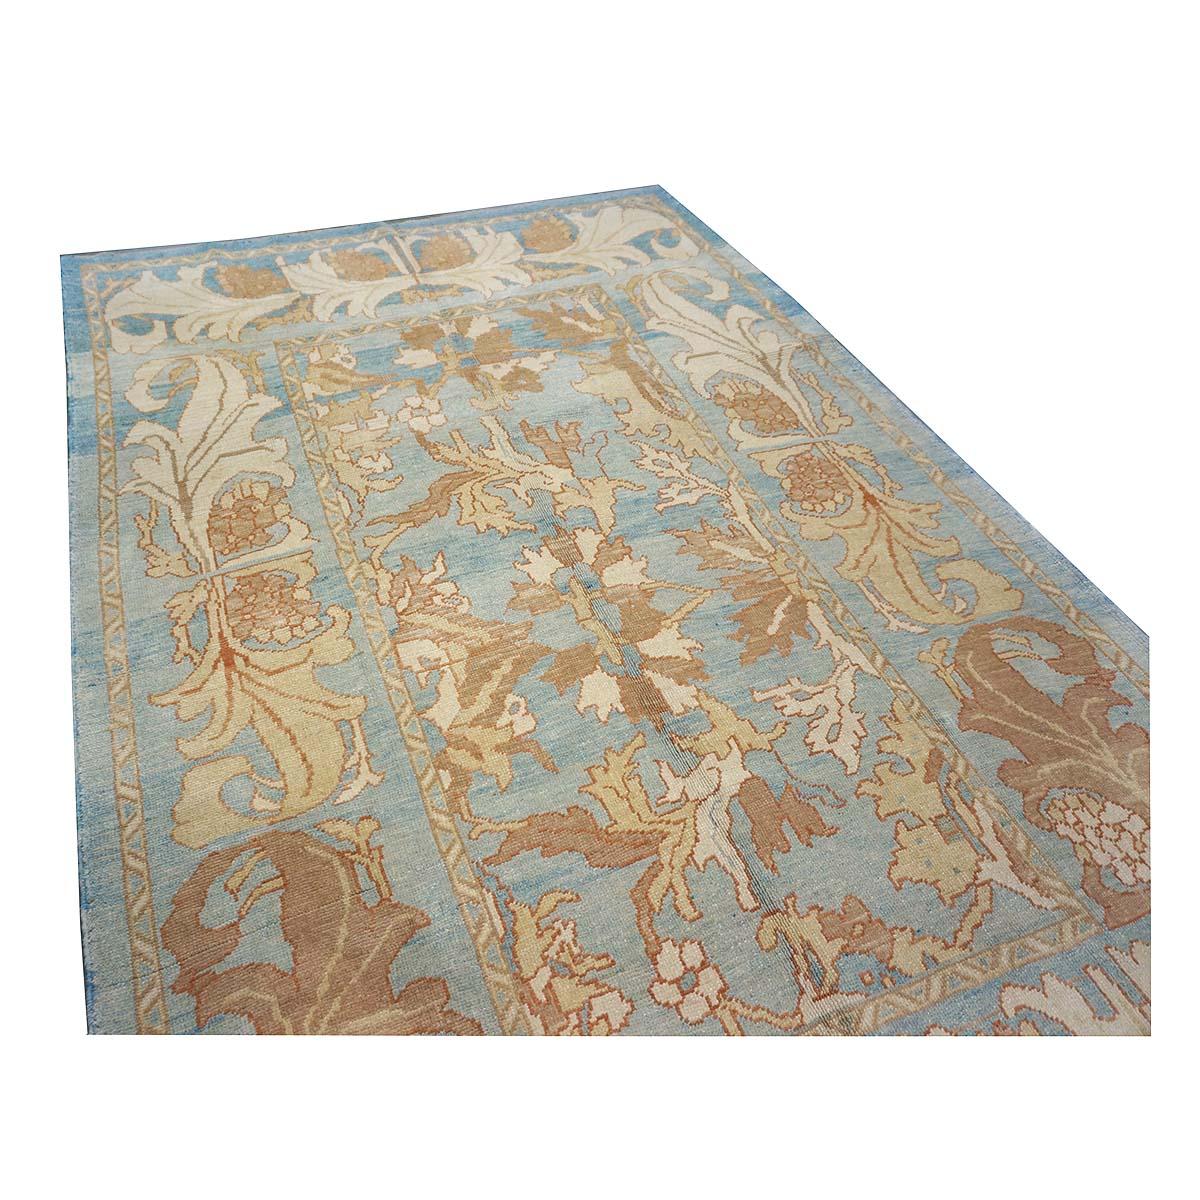  Ashly Fine Rugs presents a hand-woven recreation of an Antique Irish Donegal carpet. Created by our in-house designers and woven by the master weavers of Turkey, these rugs are made with the exact methods from which they were originally made in